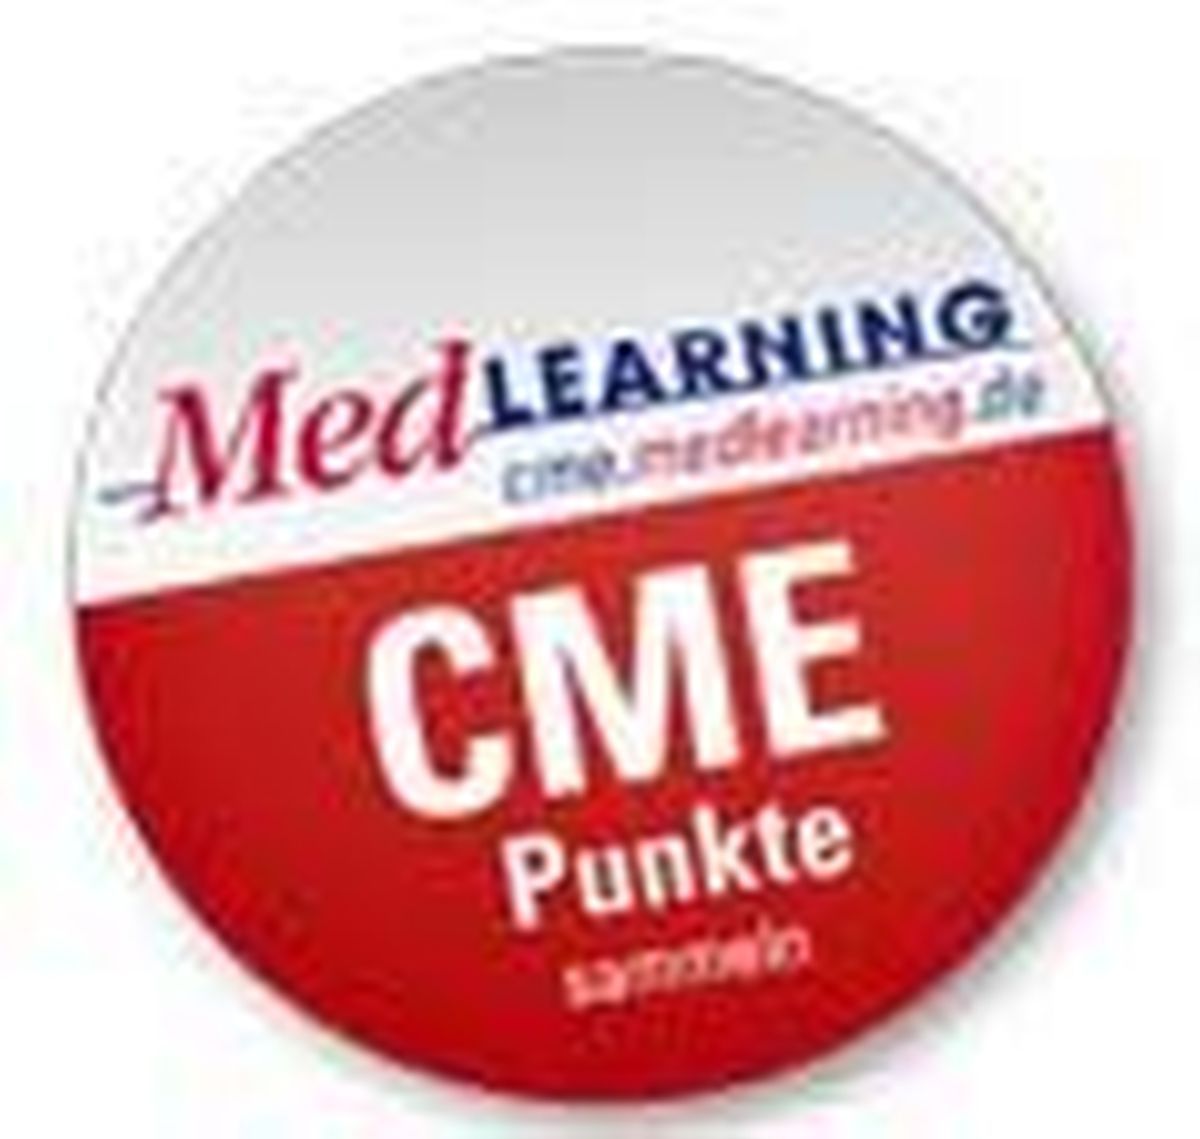 Medlearning Button